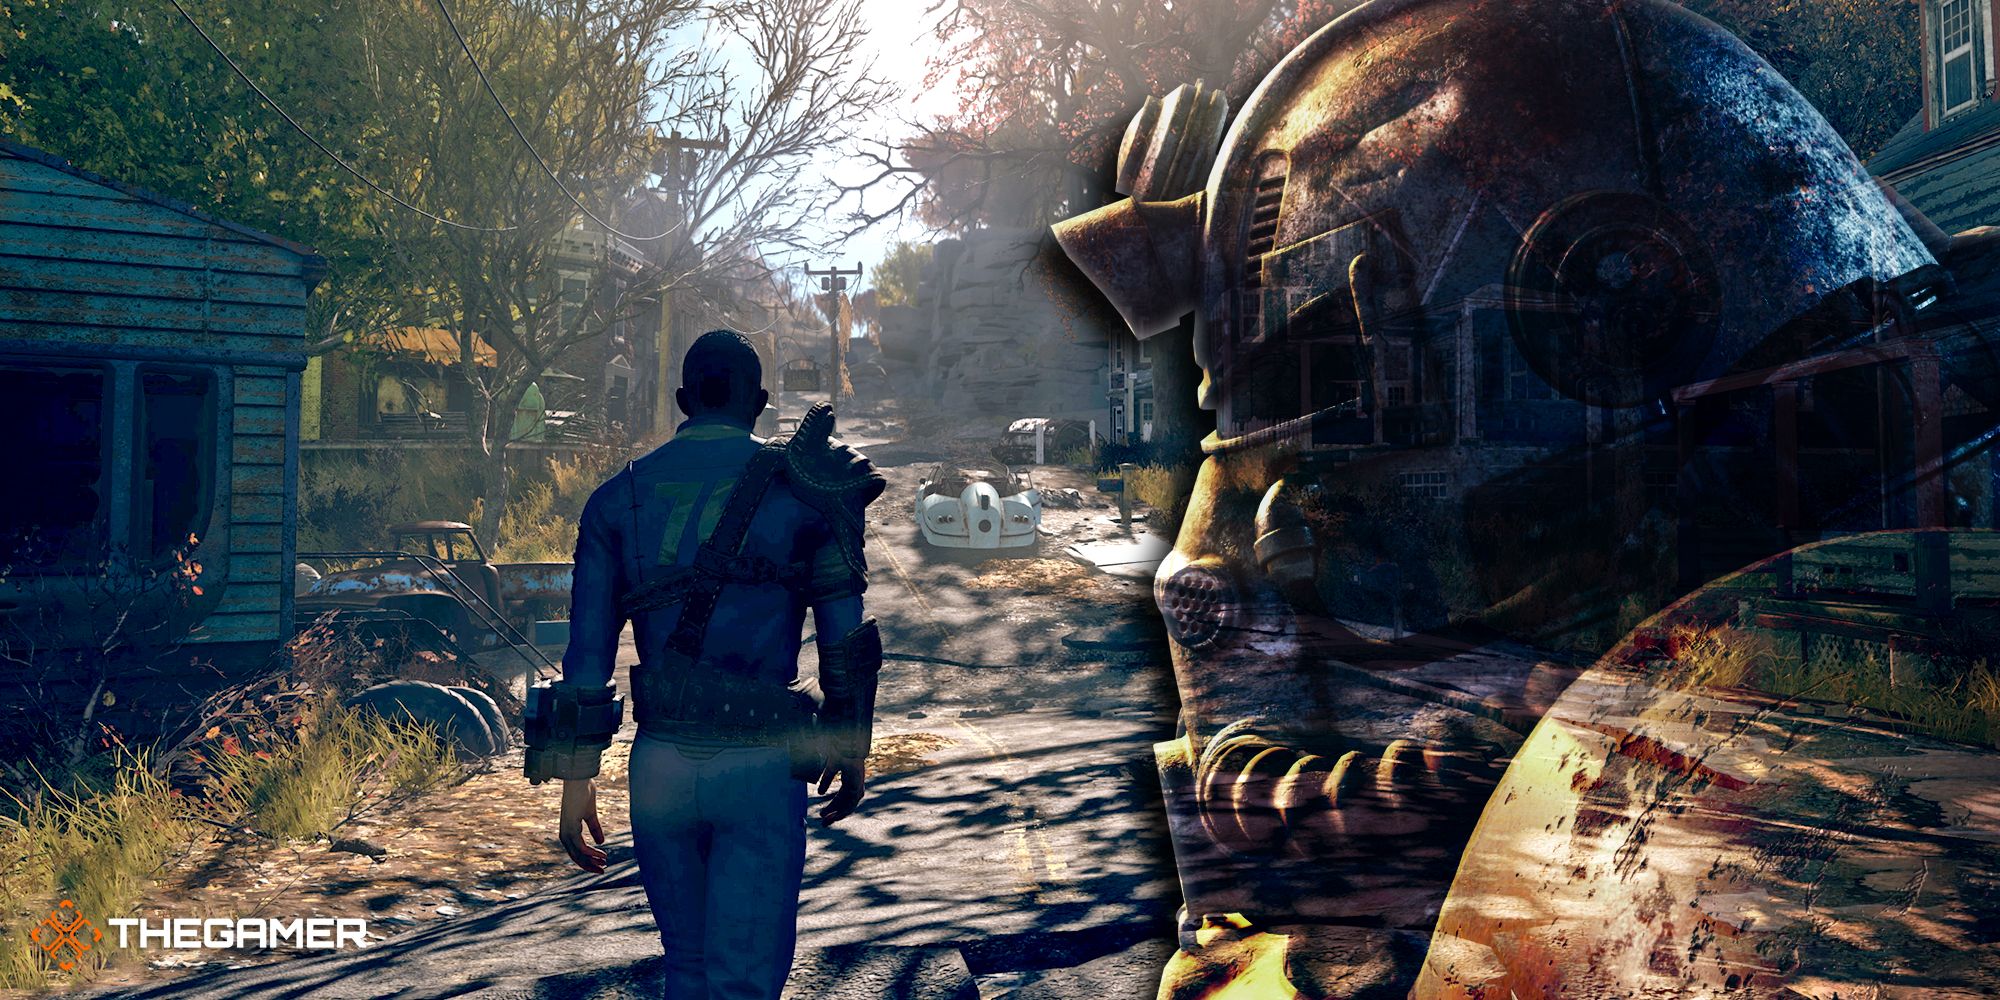 Is Fallout 76 playable solo?